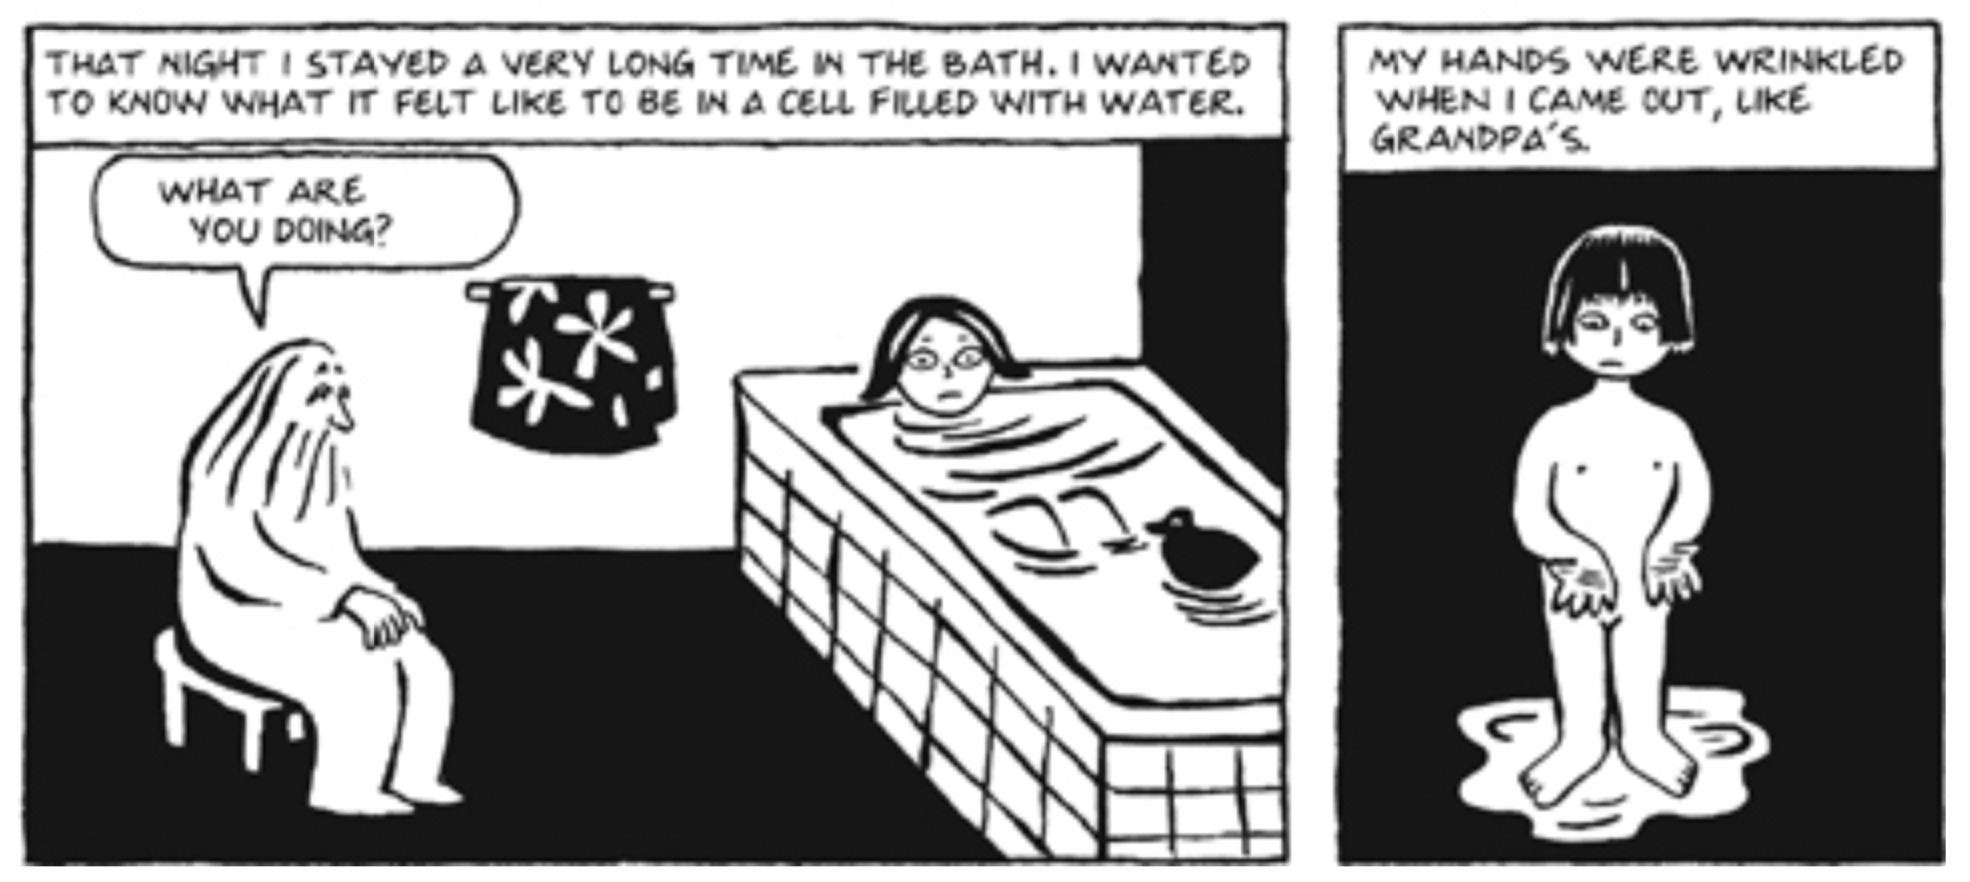 That night I stayed a very long time in the bath. I wanted to know what it felt like to be in a cell filled with water. GOD (sitting next to the narrator, a young girl, as she takes a bath): What are you doing? My hands were wrinkled when I came out, like Grandpa’s.